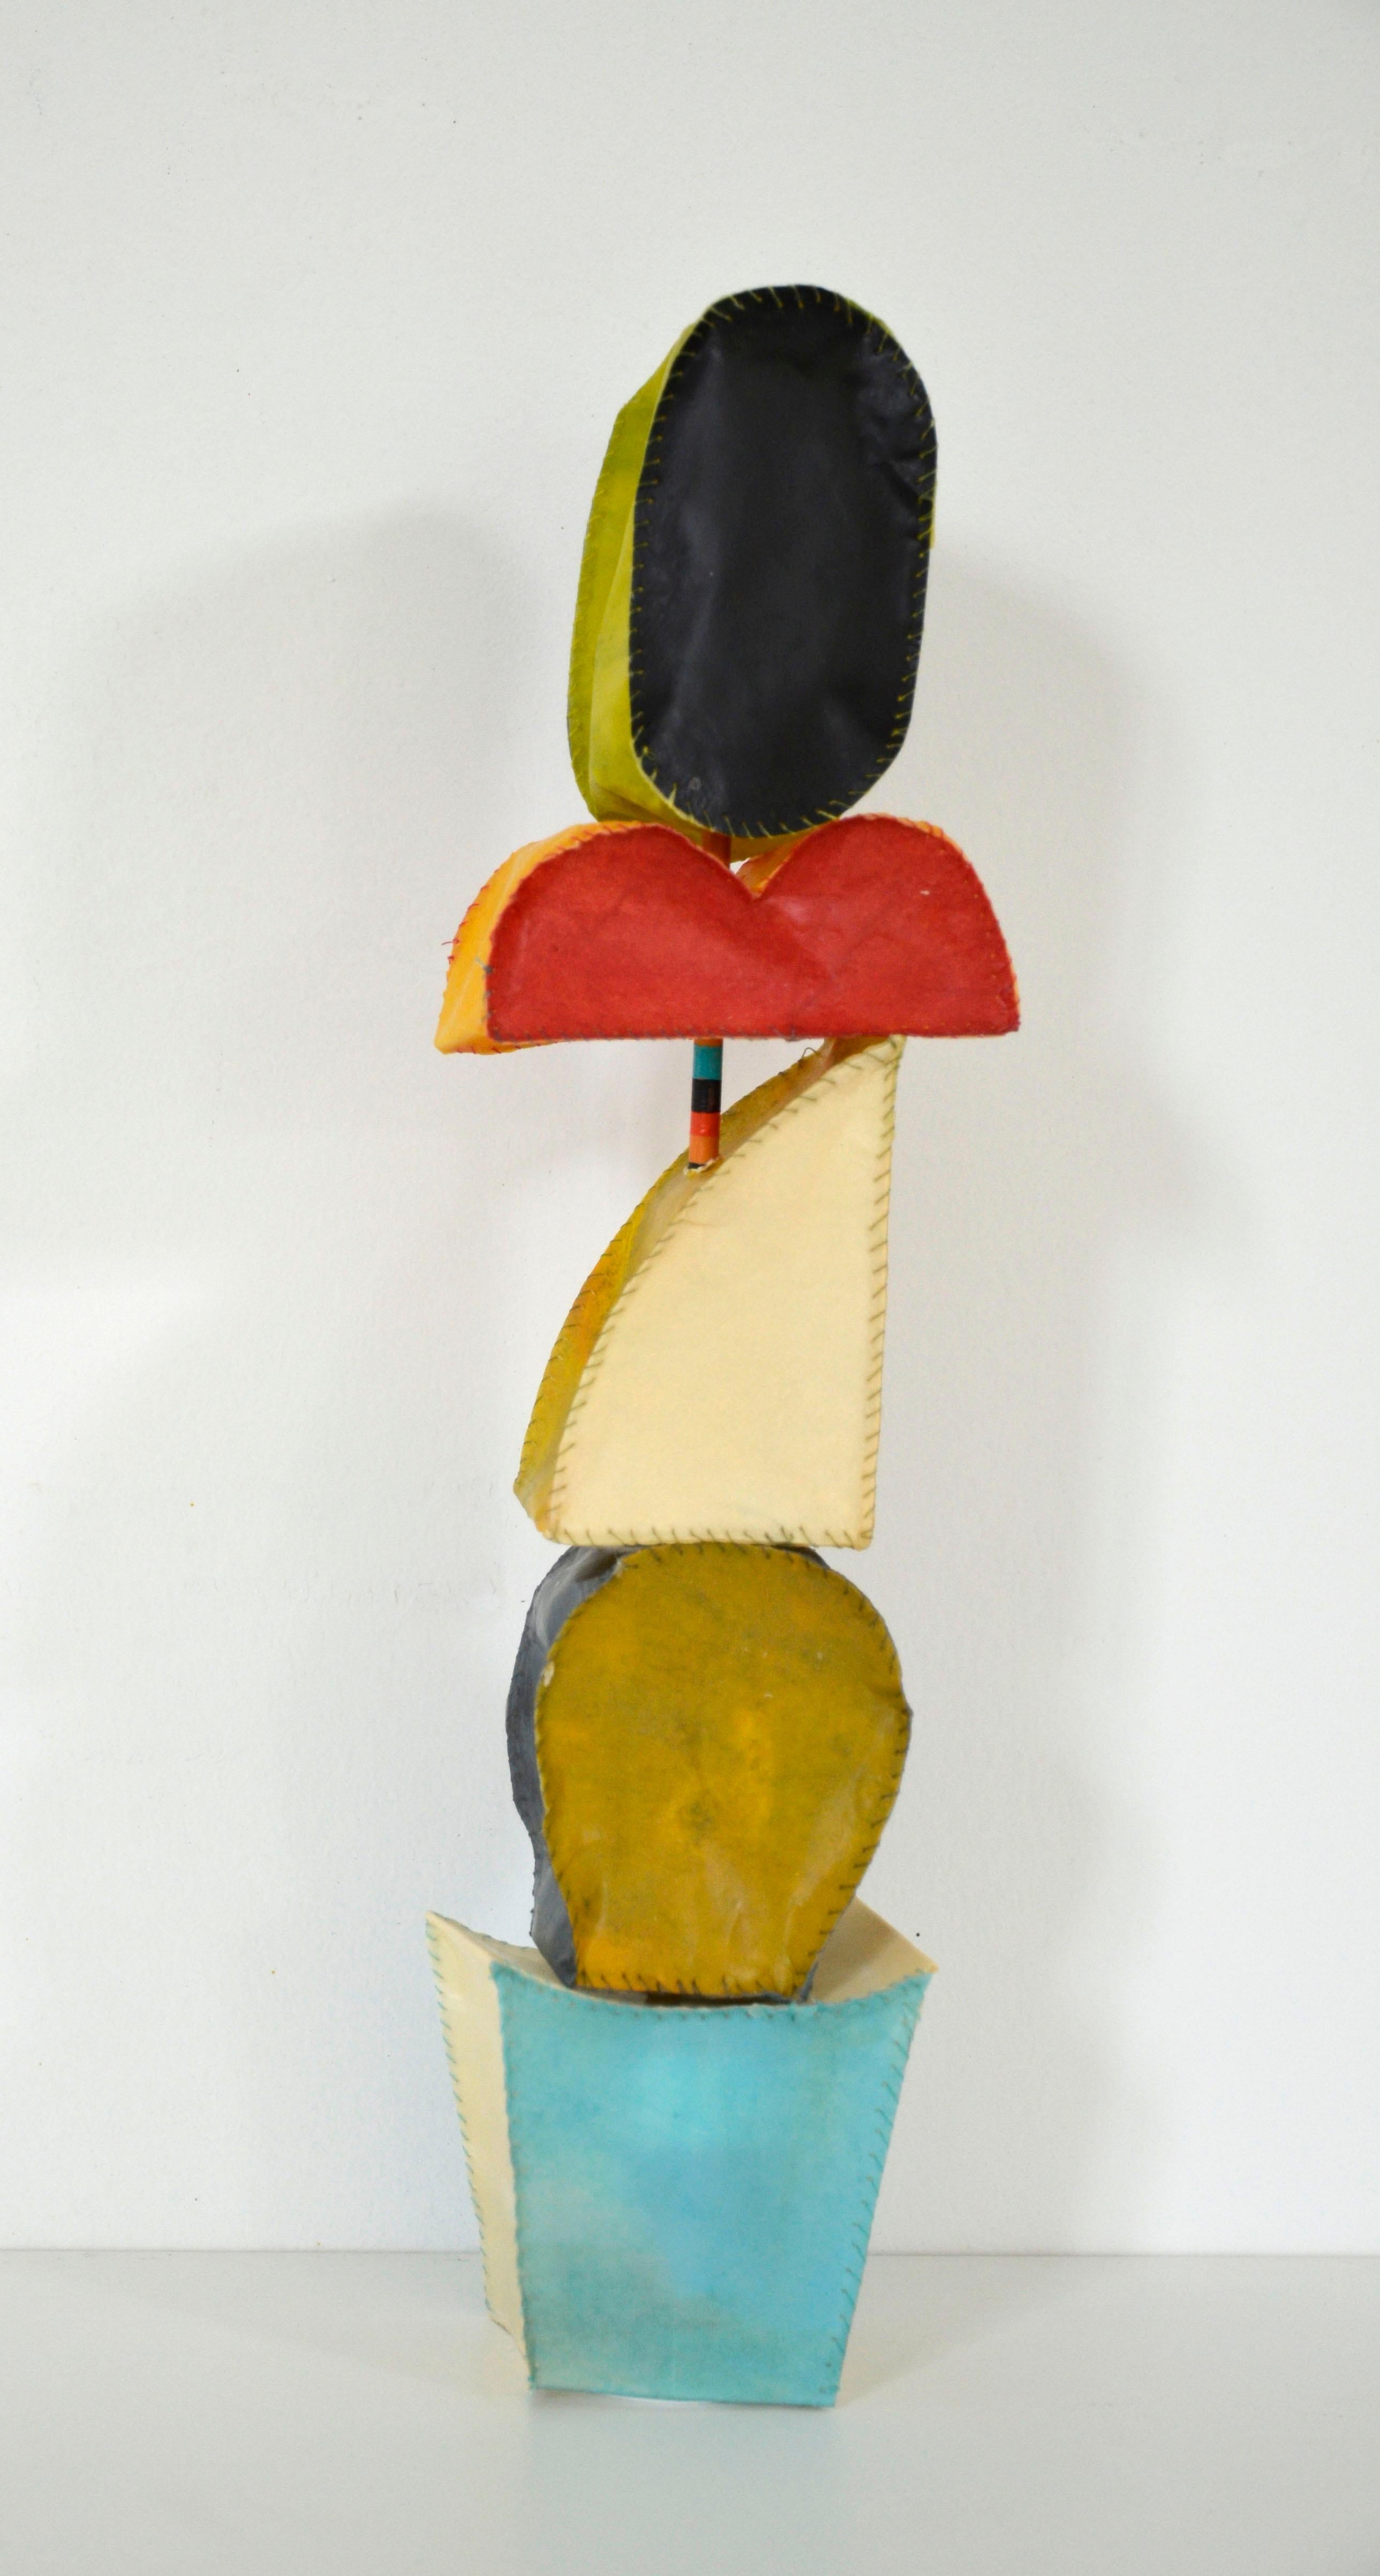 Donise English Abstract Sculpture - Play Tower #3 (Colorful Abstract Standing Sculpture in Blue, Beige, Red & Black)